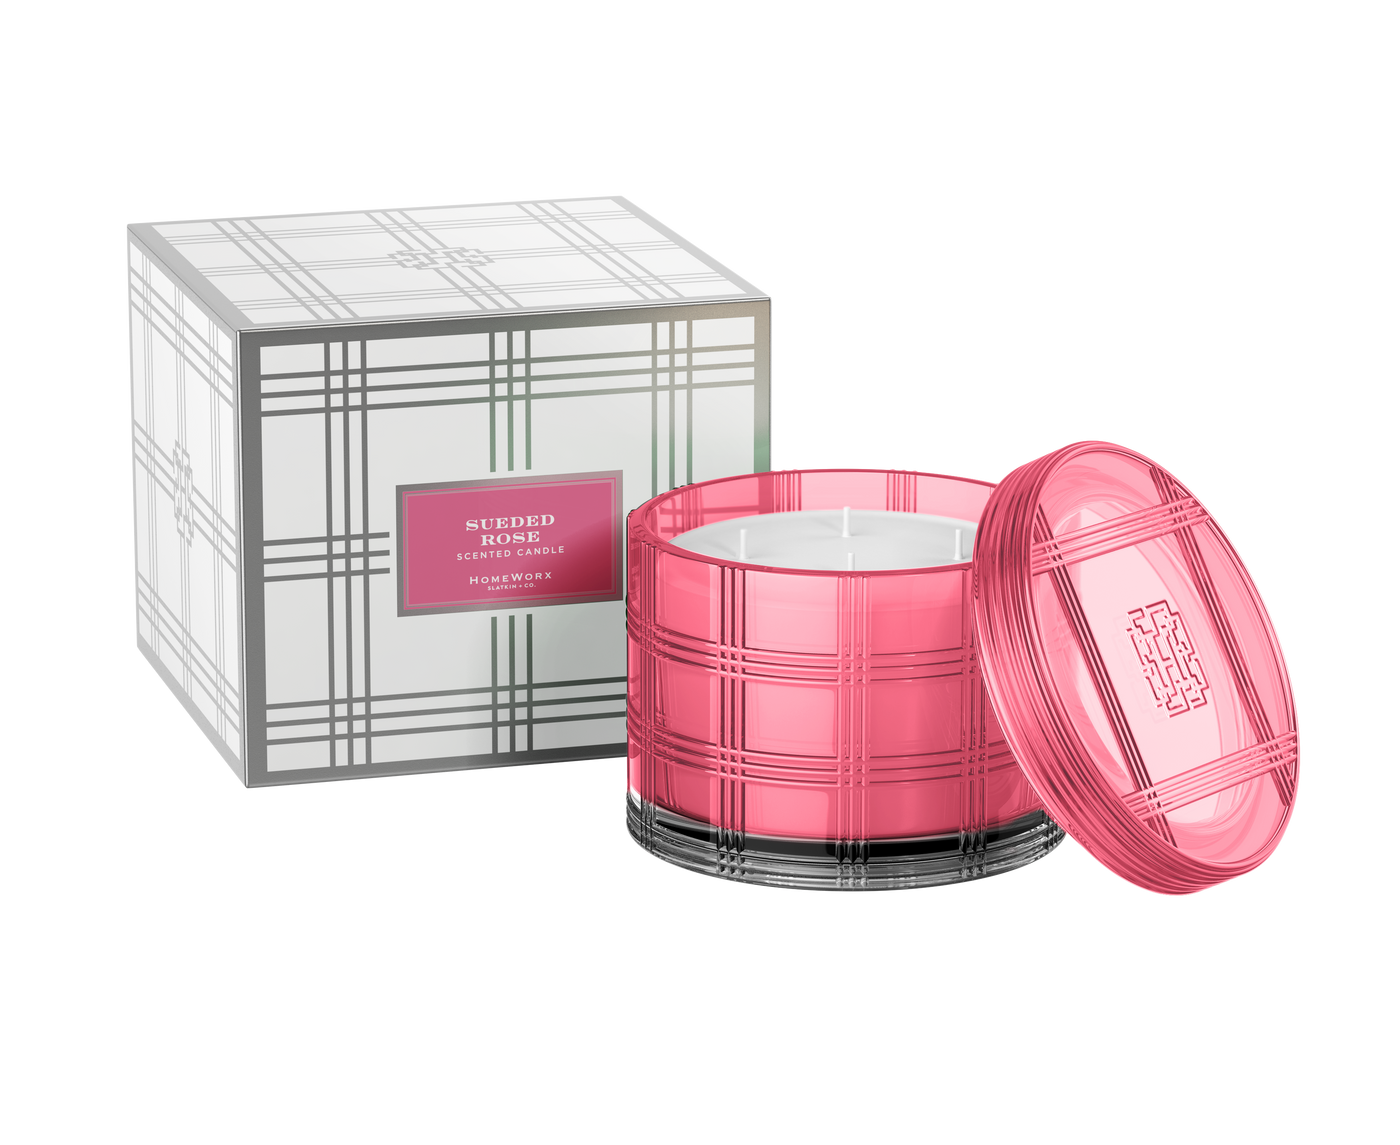 Sueded Rose Specialty Candle with Gift Box